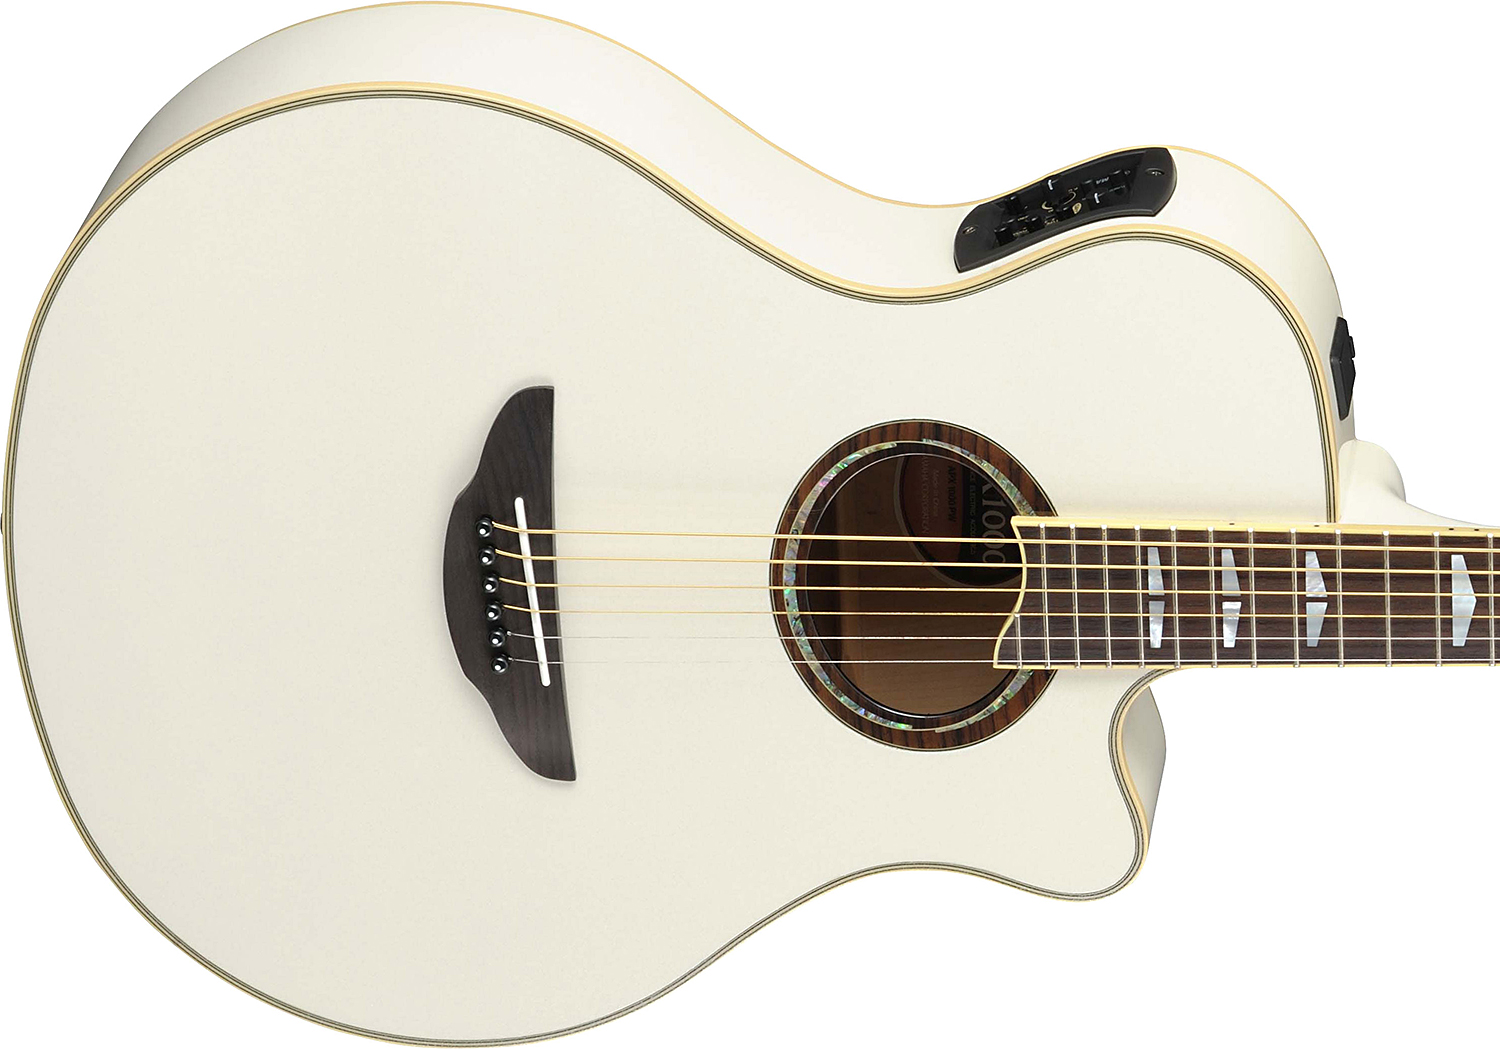 Yamaha Apx1000 Pearl White - Pearl White - Electro acoustic guitar - Variation 2